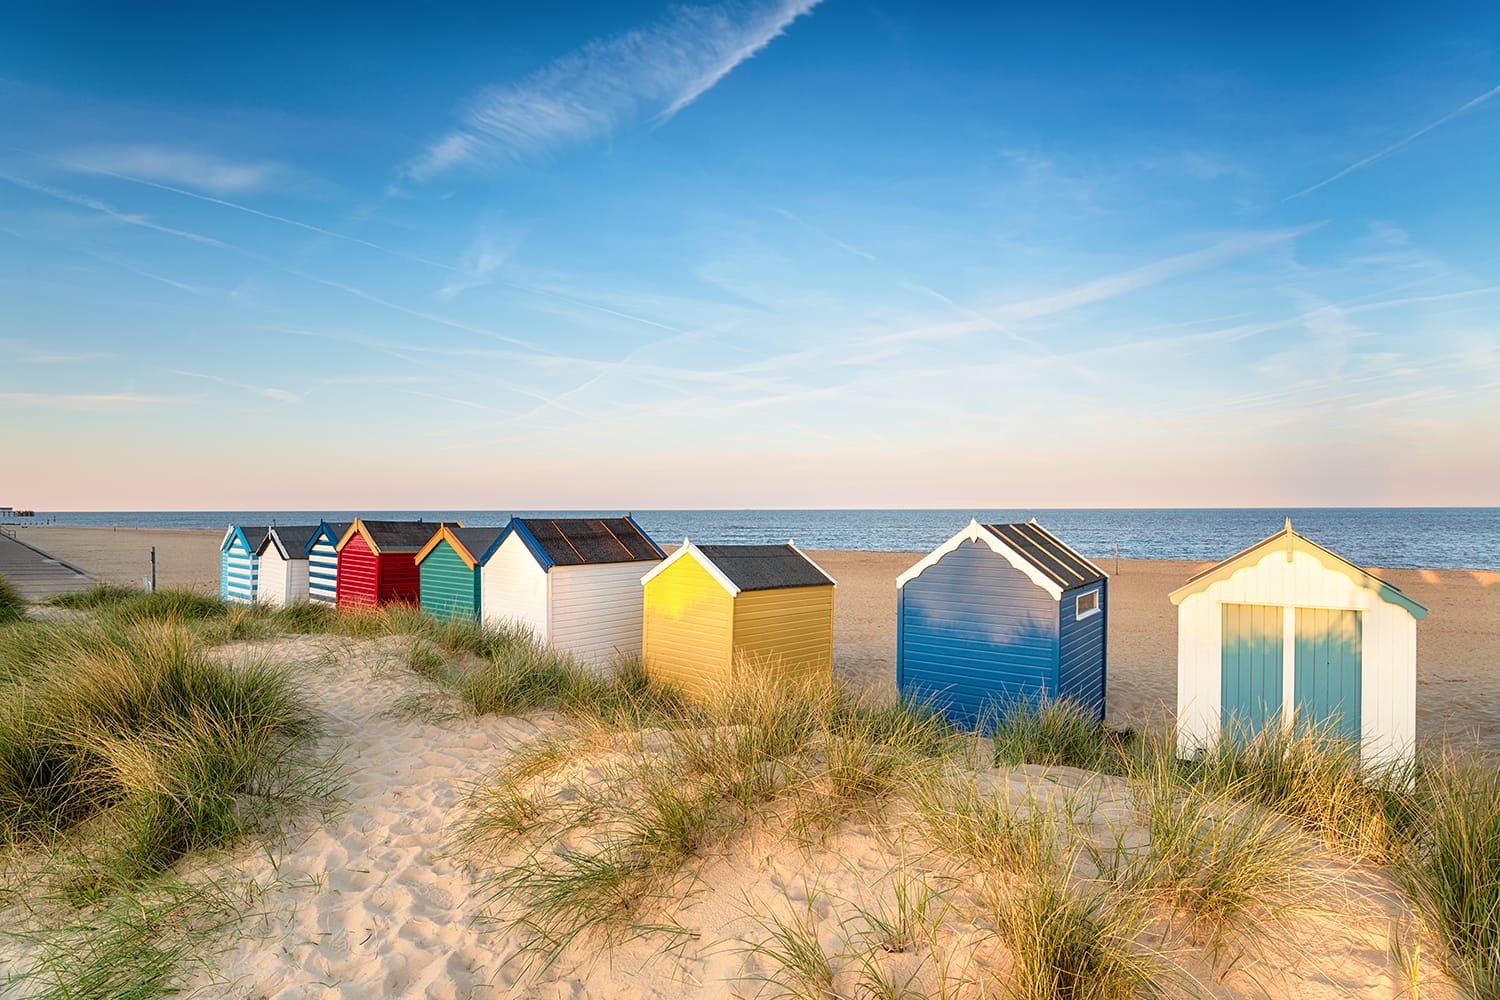 Beach huts in sand dunes at Southwold on the Suffolk coast, UK